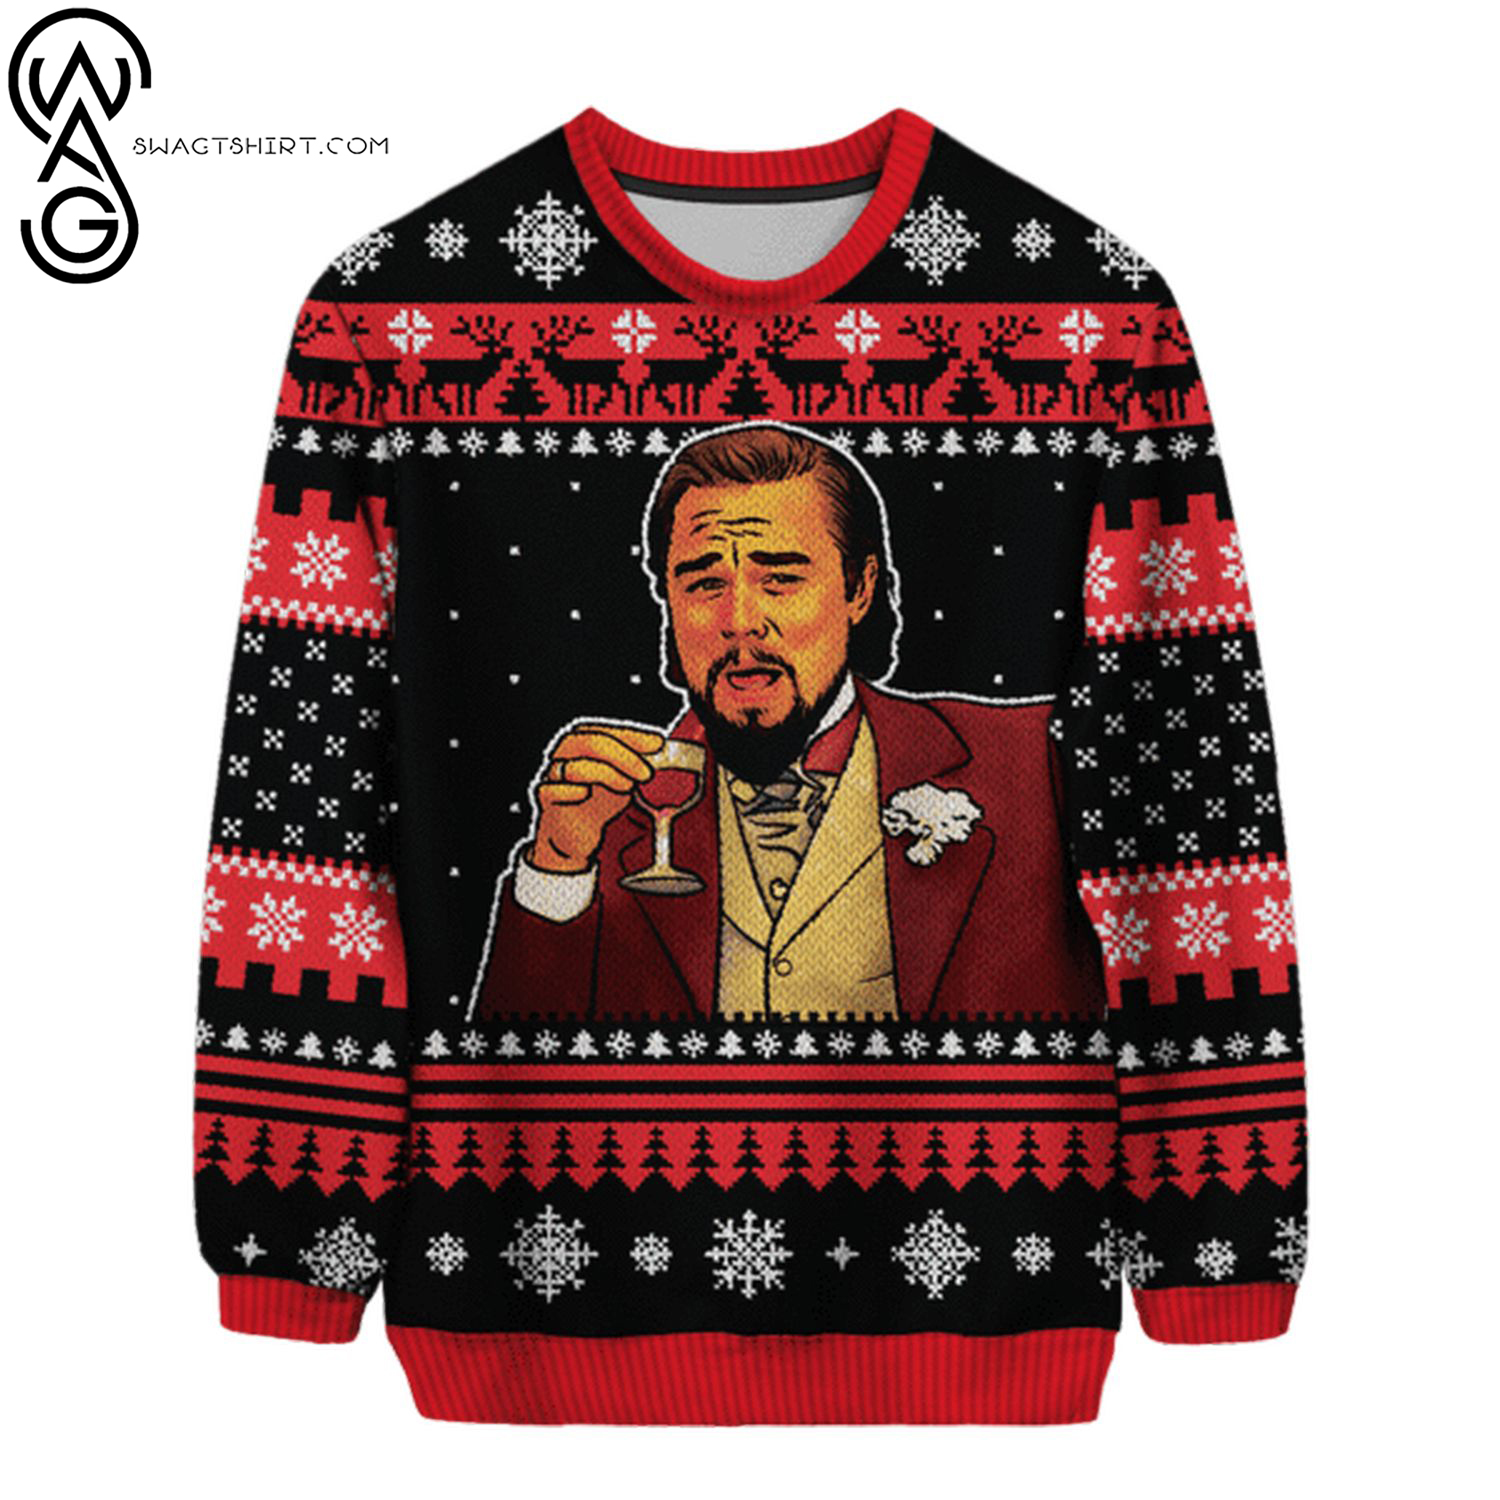 Leo dicaprio laughing with wine ugly christmas sweater